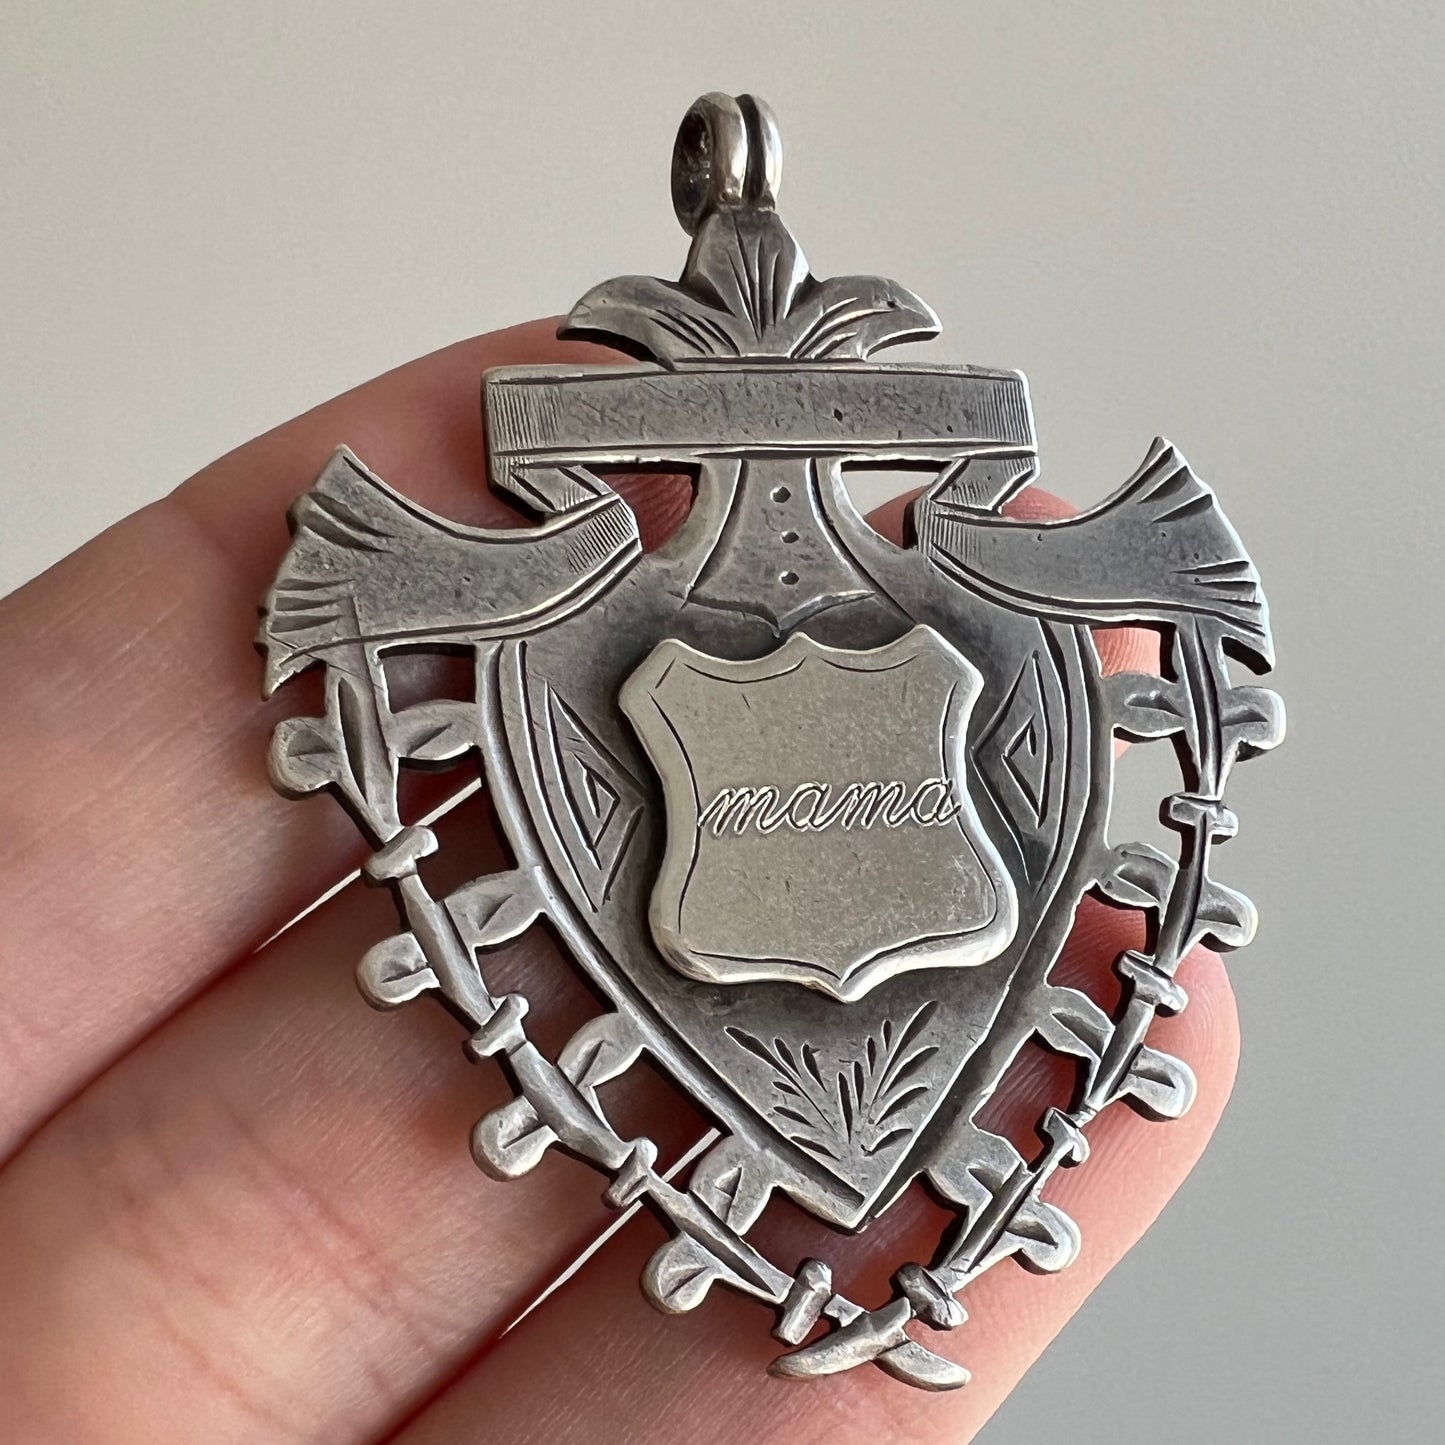 reimagined A N T I Q U E // maternal shield / sterling silver antique fob medal with new 'mama' engraving / a pendant